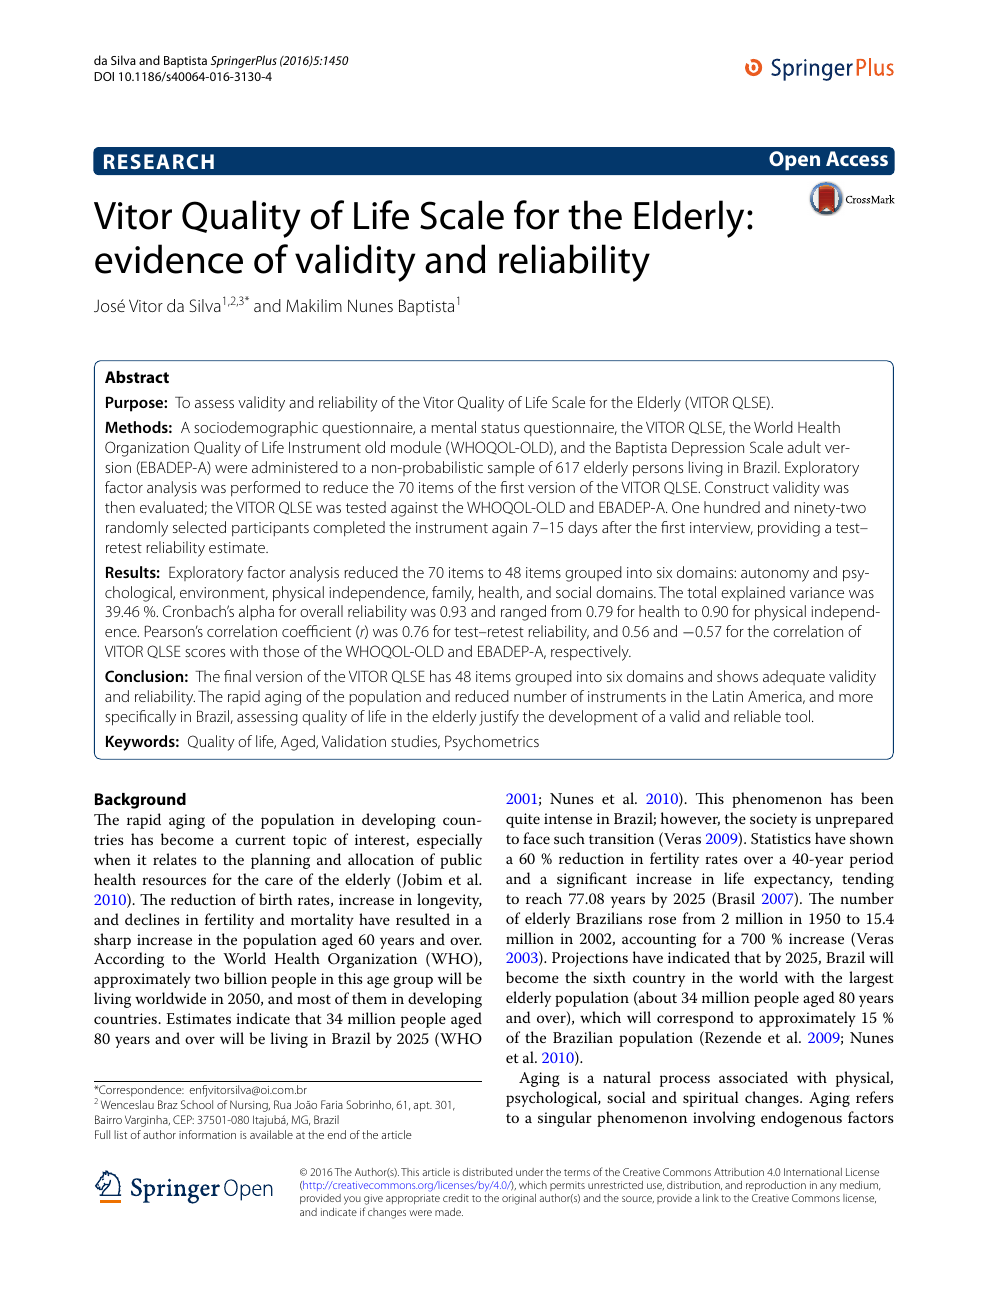 Vitor Quality of Life Scale for the Elderly evidence of validity and reliability